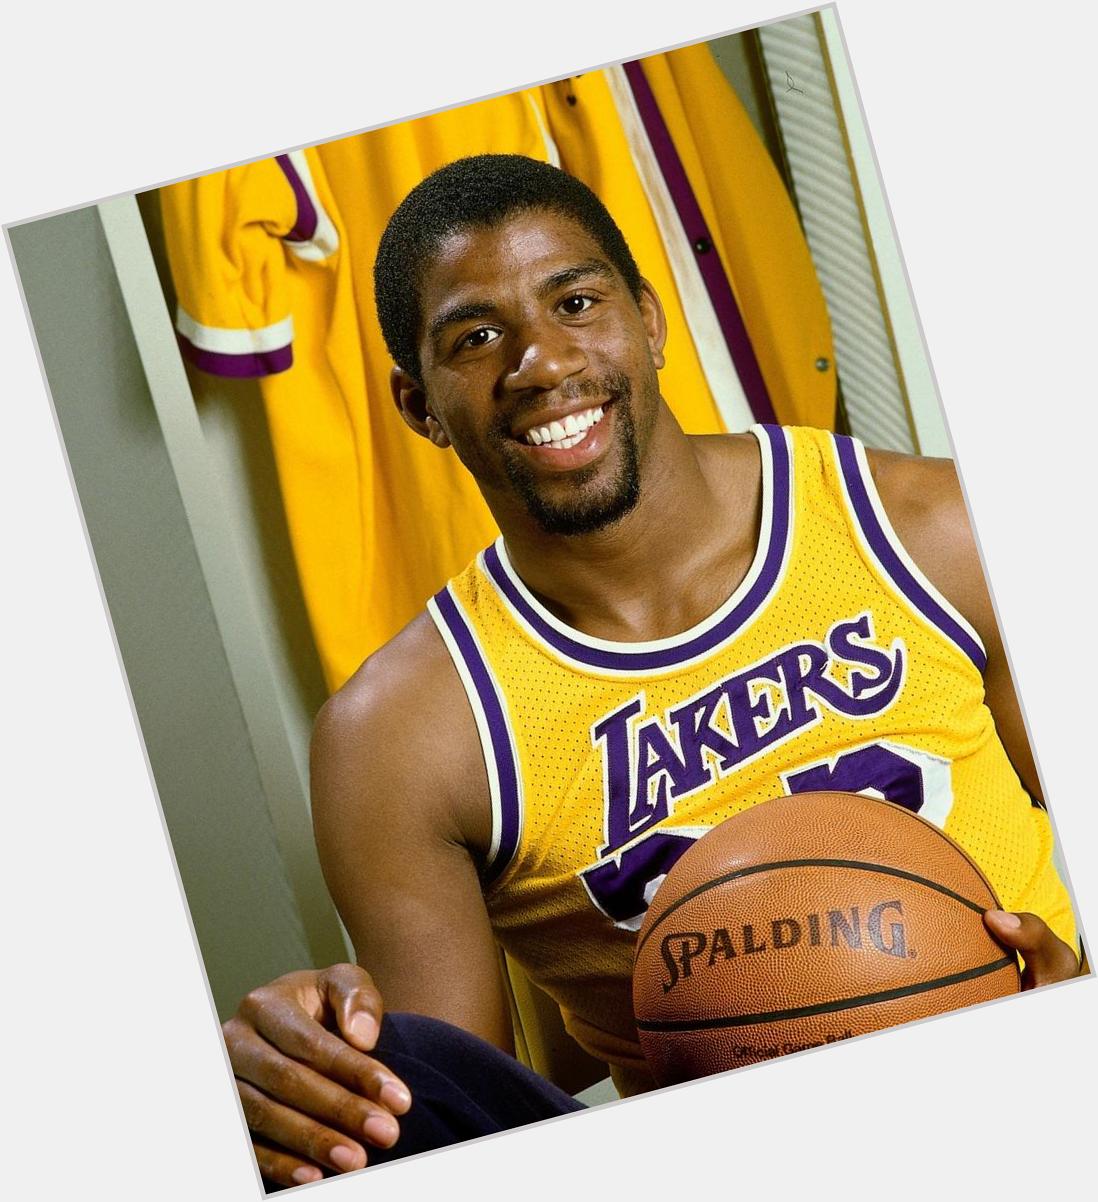 Happy Birthday to my all-time favorite basketball player, Earvin \Magic\ Johnson. The greatest Laker turns 56 today. 